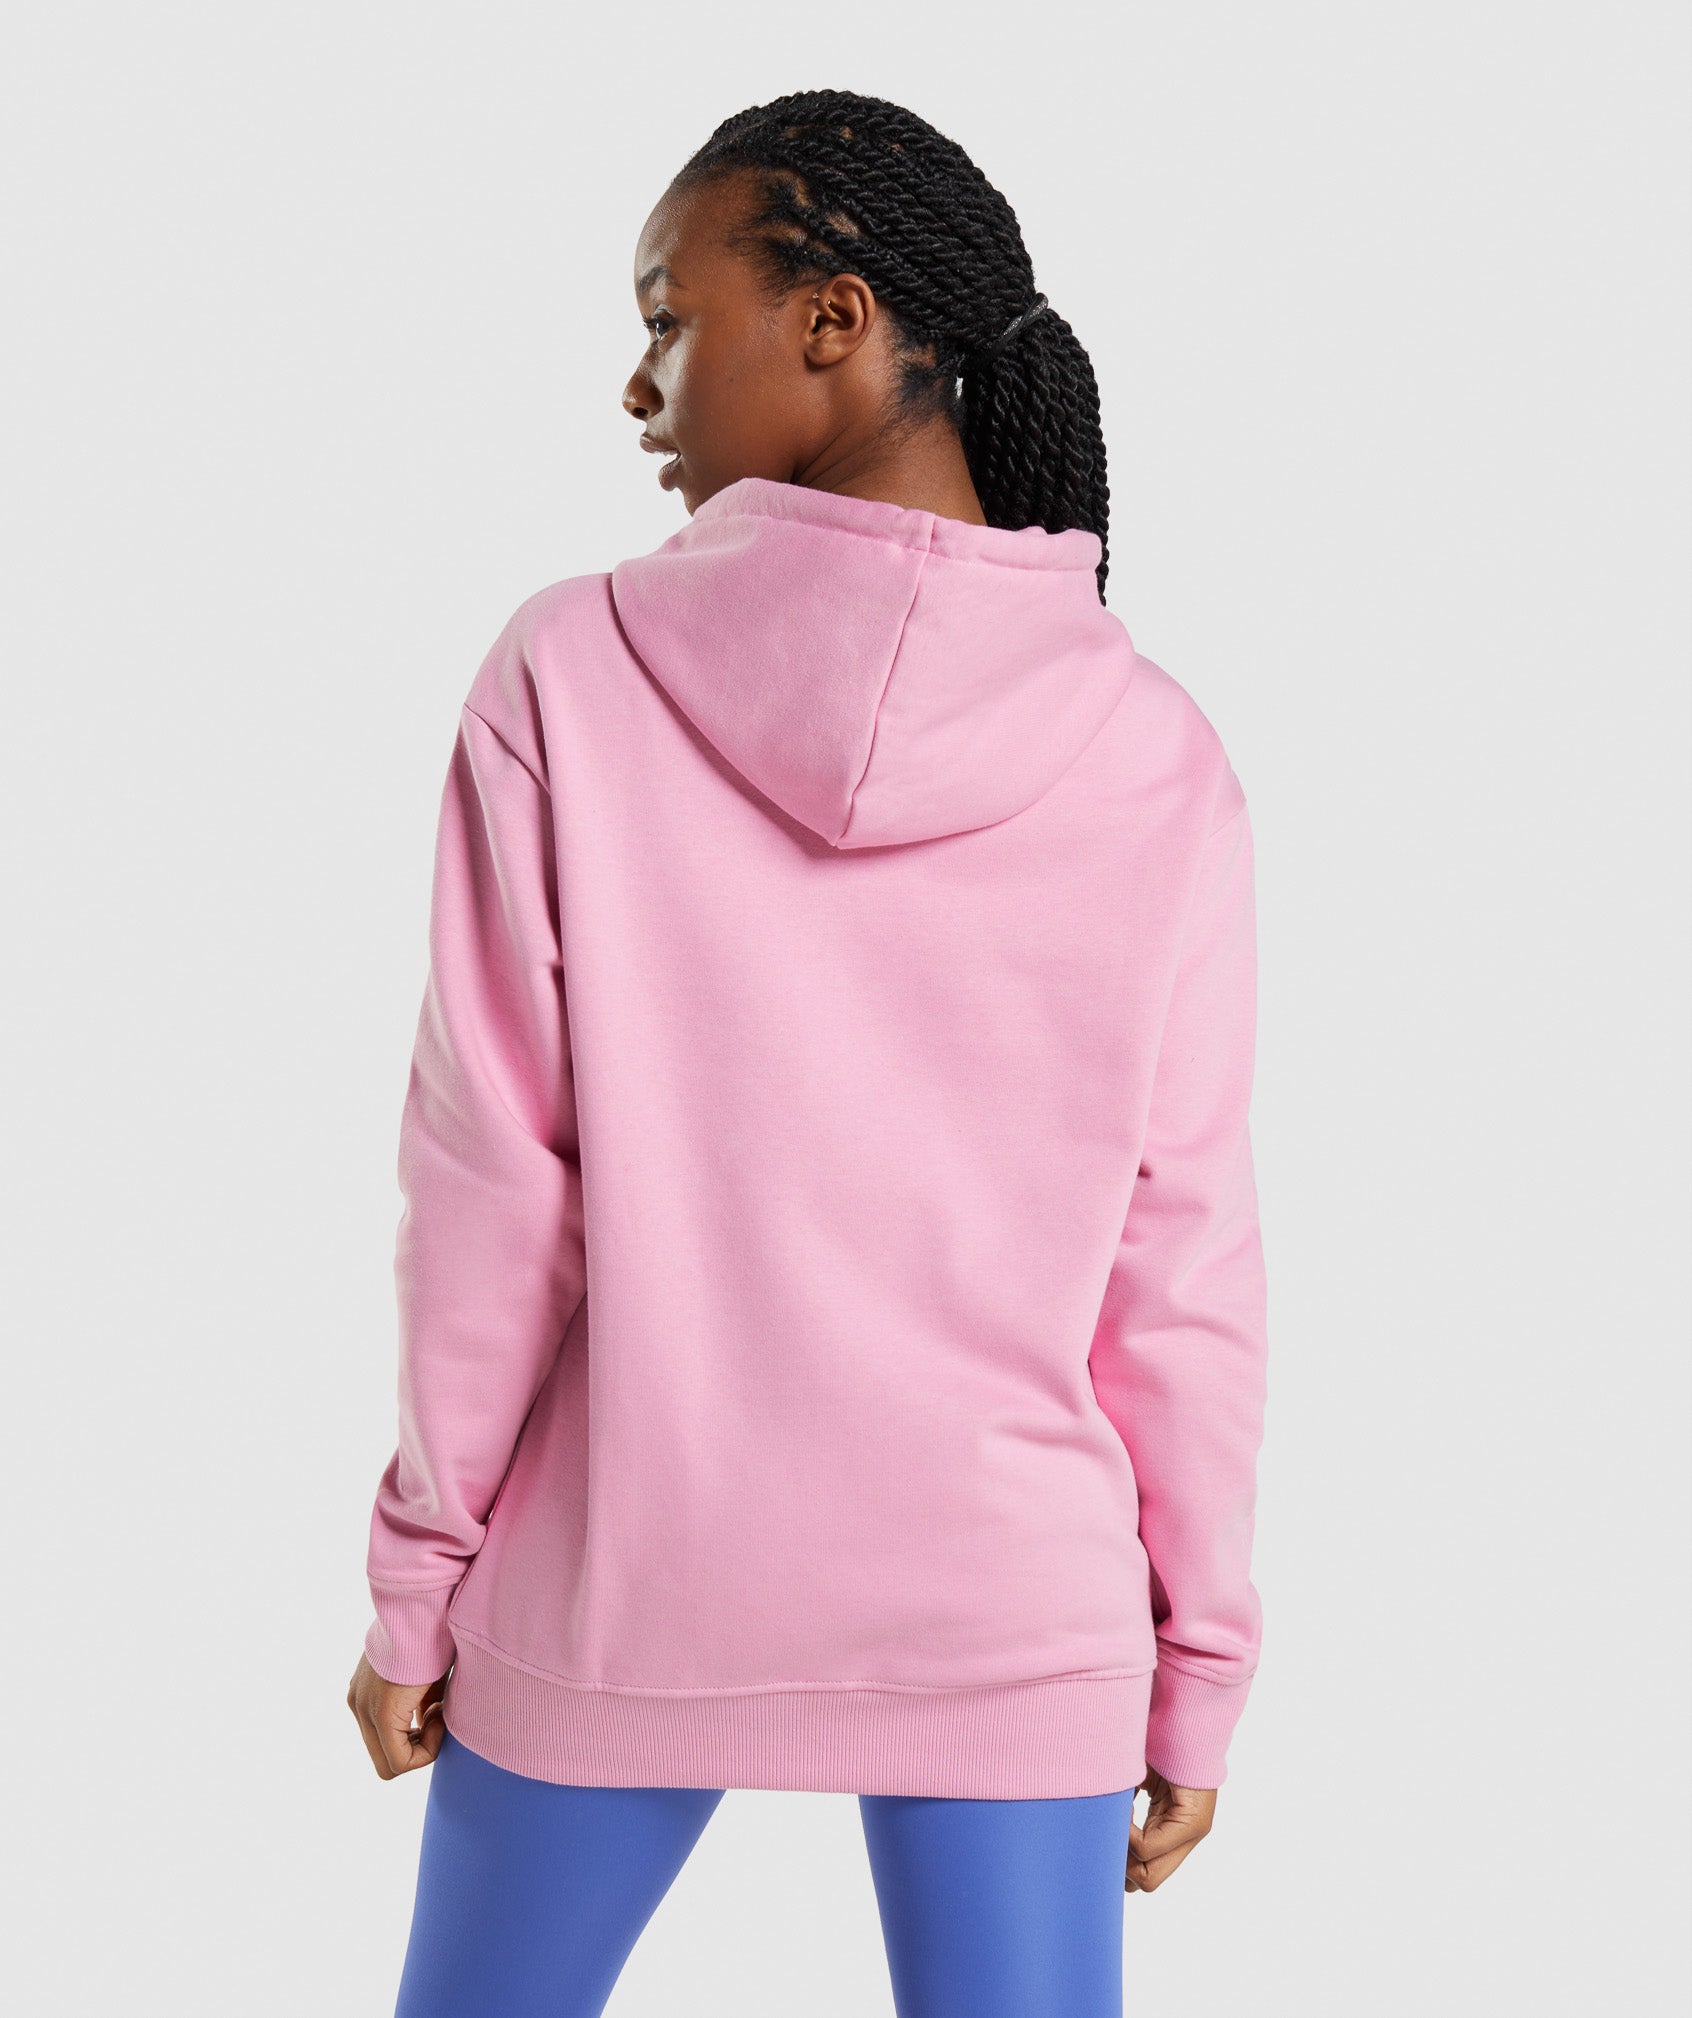 Apollo Oversized Hoodie in Sorbet Pink - view 2